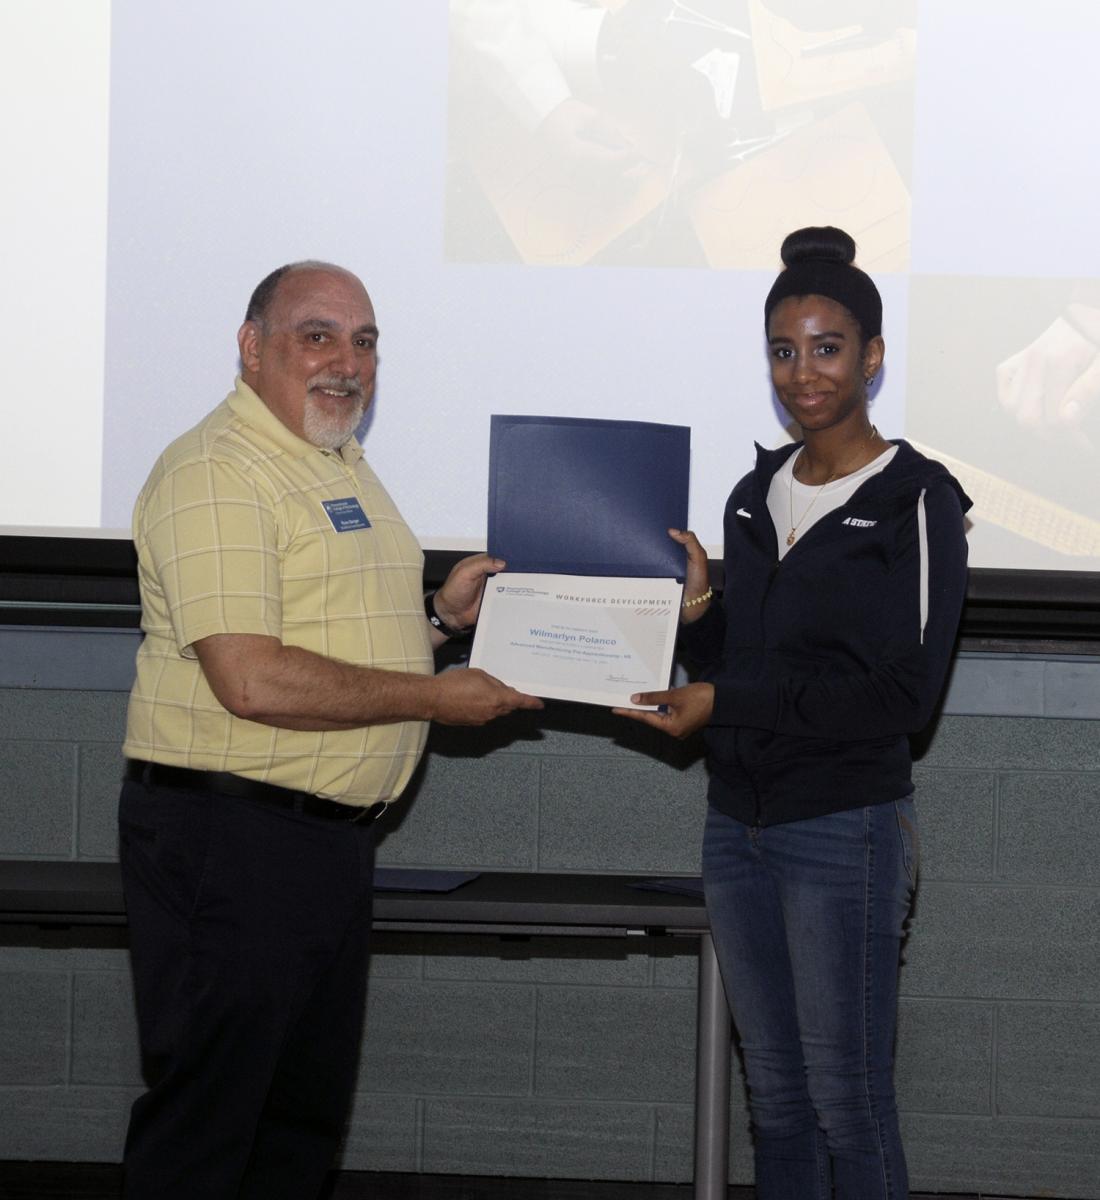 Wilmarlyn Uribe Polanco, from Allentown's Executive Education Academy Charter School, was among the students who completed both the AMP program and earned Certified Manufacturing Associate recognition from the Society of Manufacturing Engineers ...